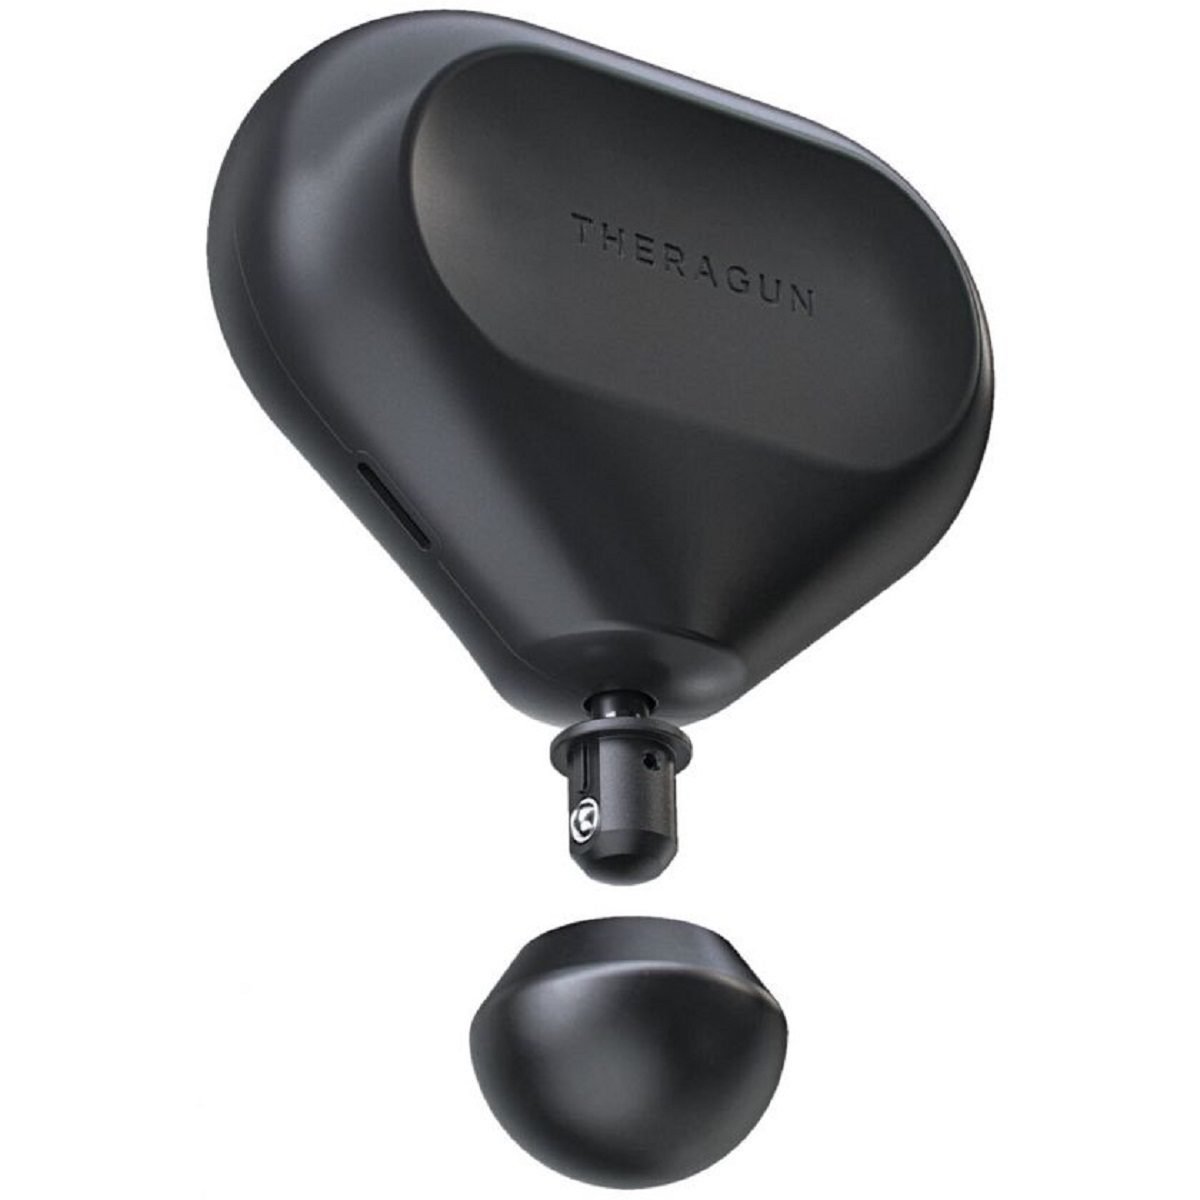 The Theragun mini is one of the best massage guns you can buy.